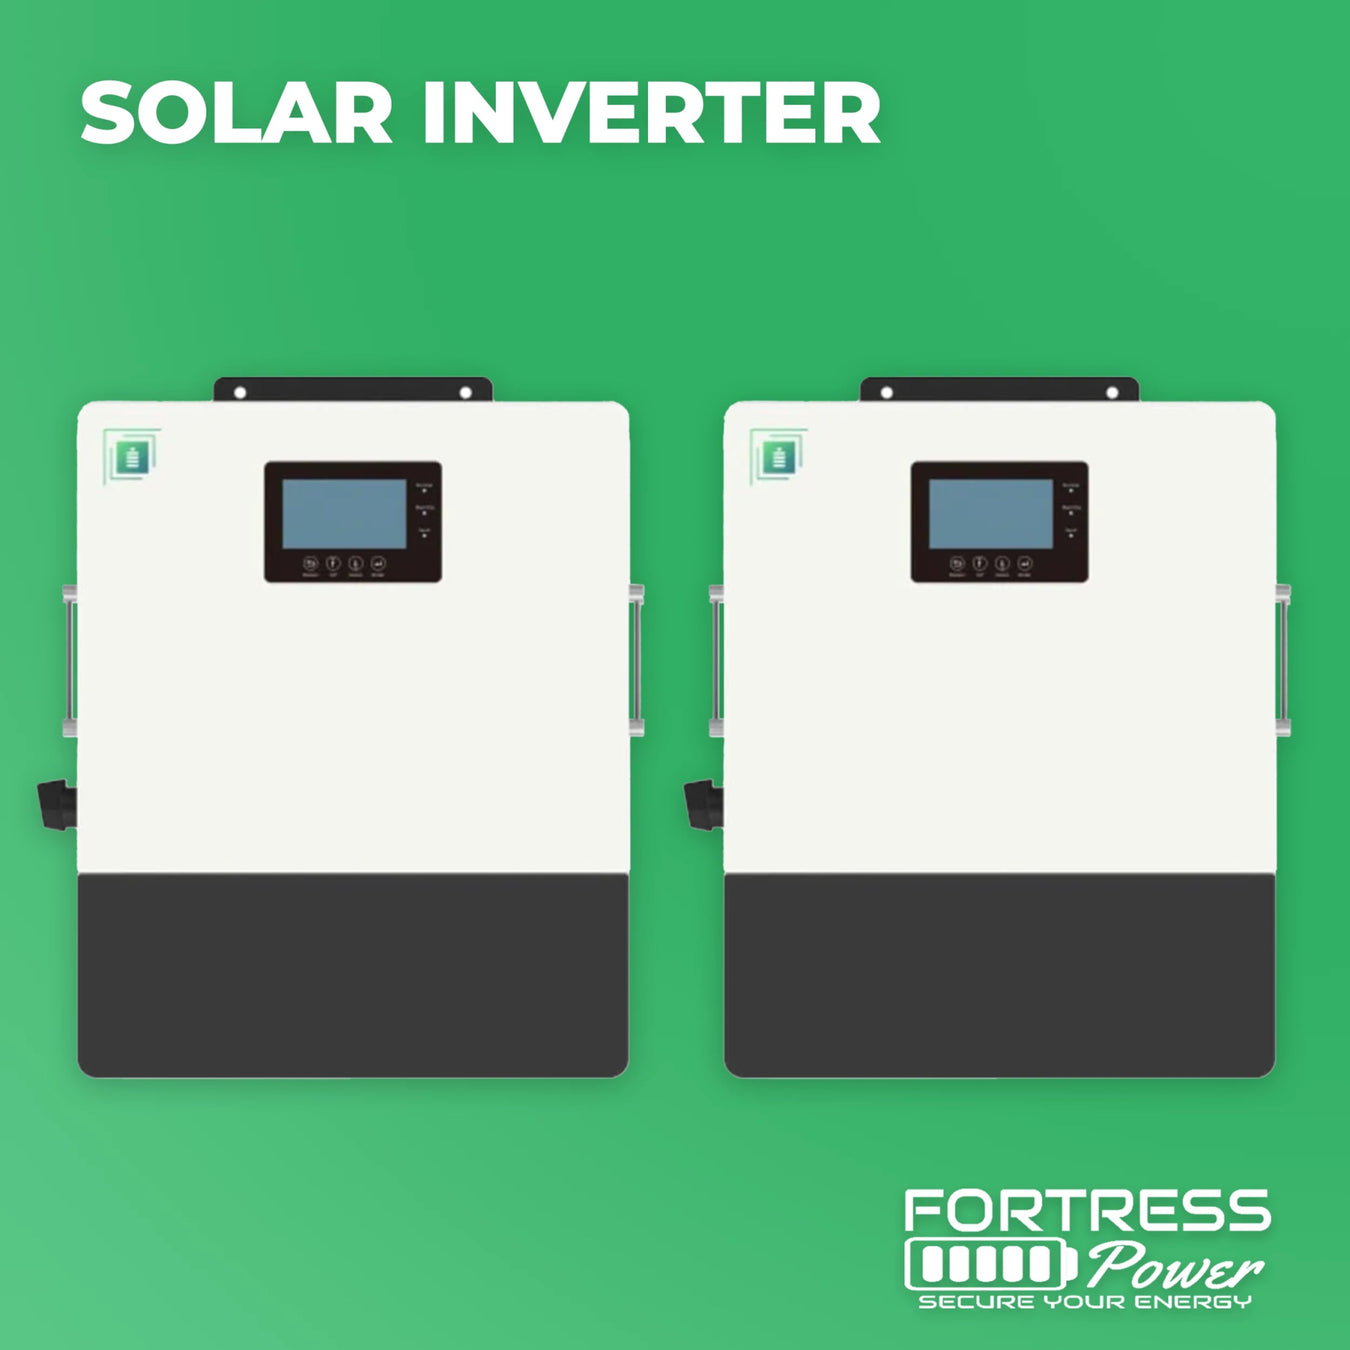 Fortress Power - Solar Inverter - PremiumDepot Collection